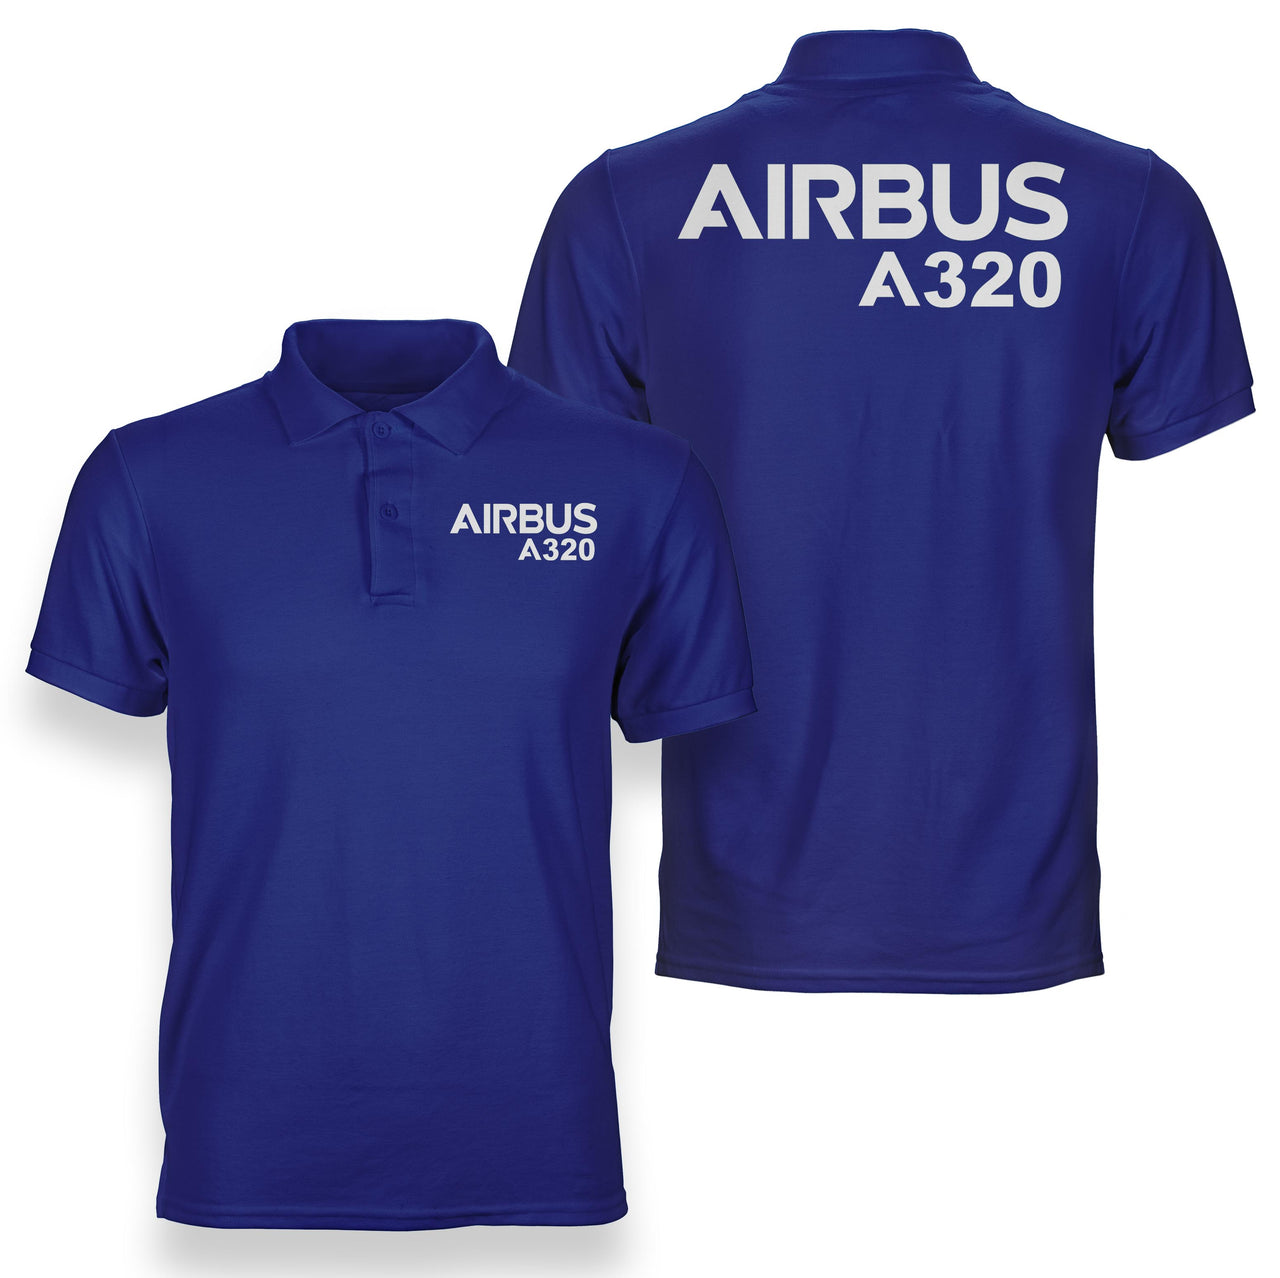 Airbus A320 & Text Designed Double Side Polo T-Shirts